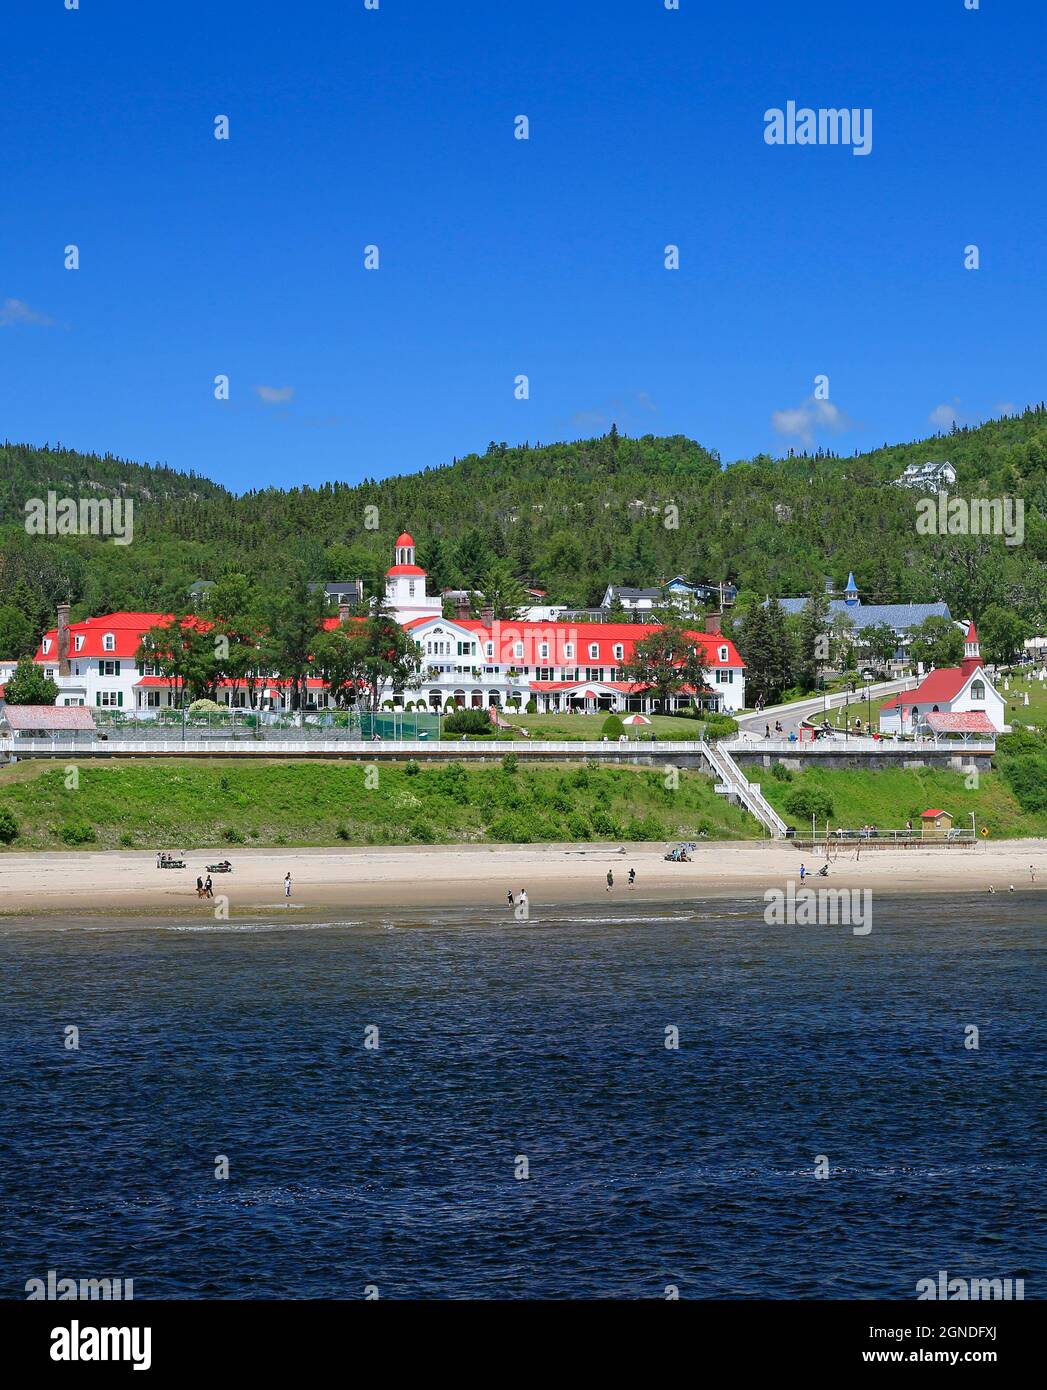 Tadoussac skyline with beach and Saguenay Fjord river on the foreground, Quebec, Canada Stock Photo